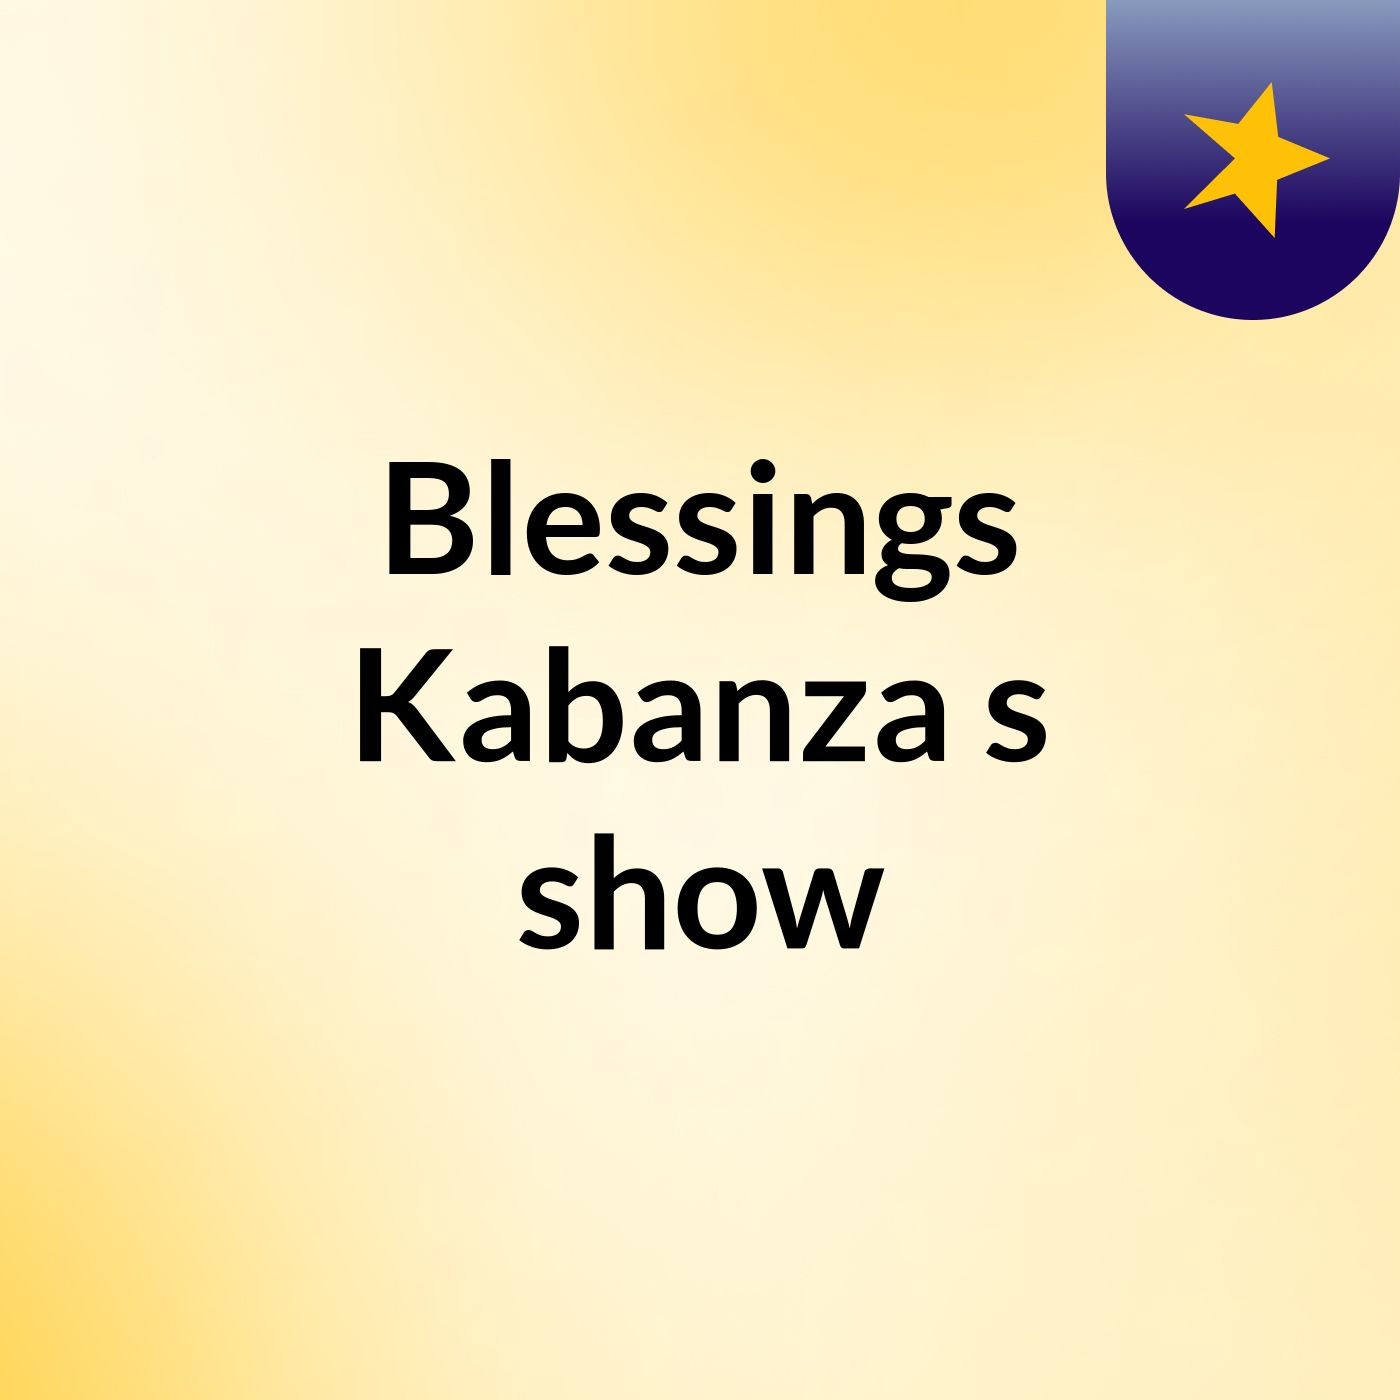 Episode 5 - Blessings Kabanza's show